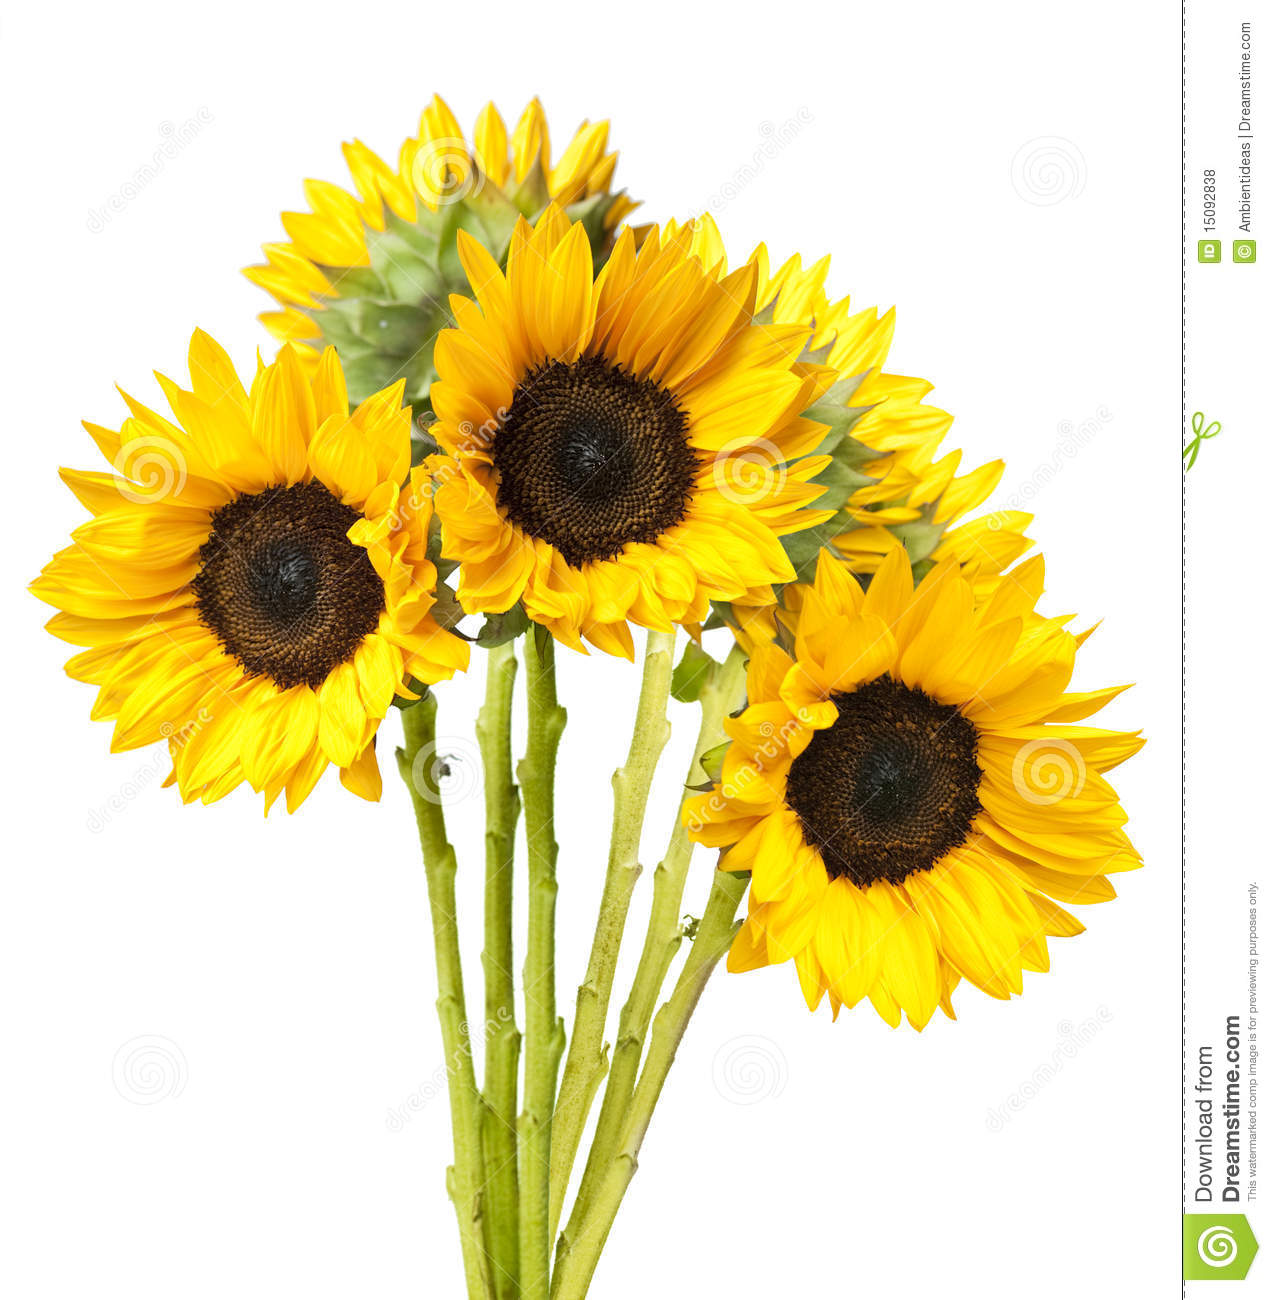 Sunflower Bouquet Isolated On White Royalty Free Stock Photos   Image    